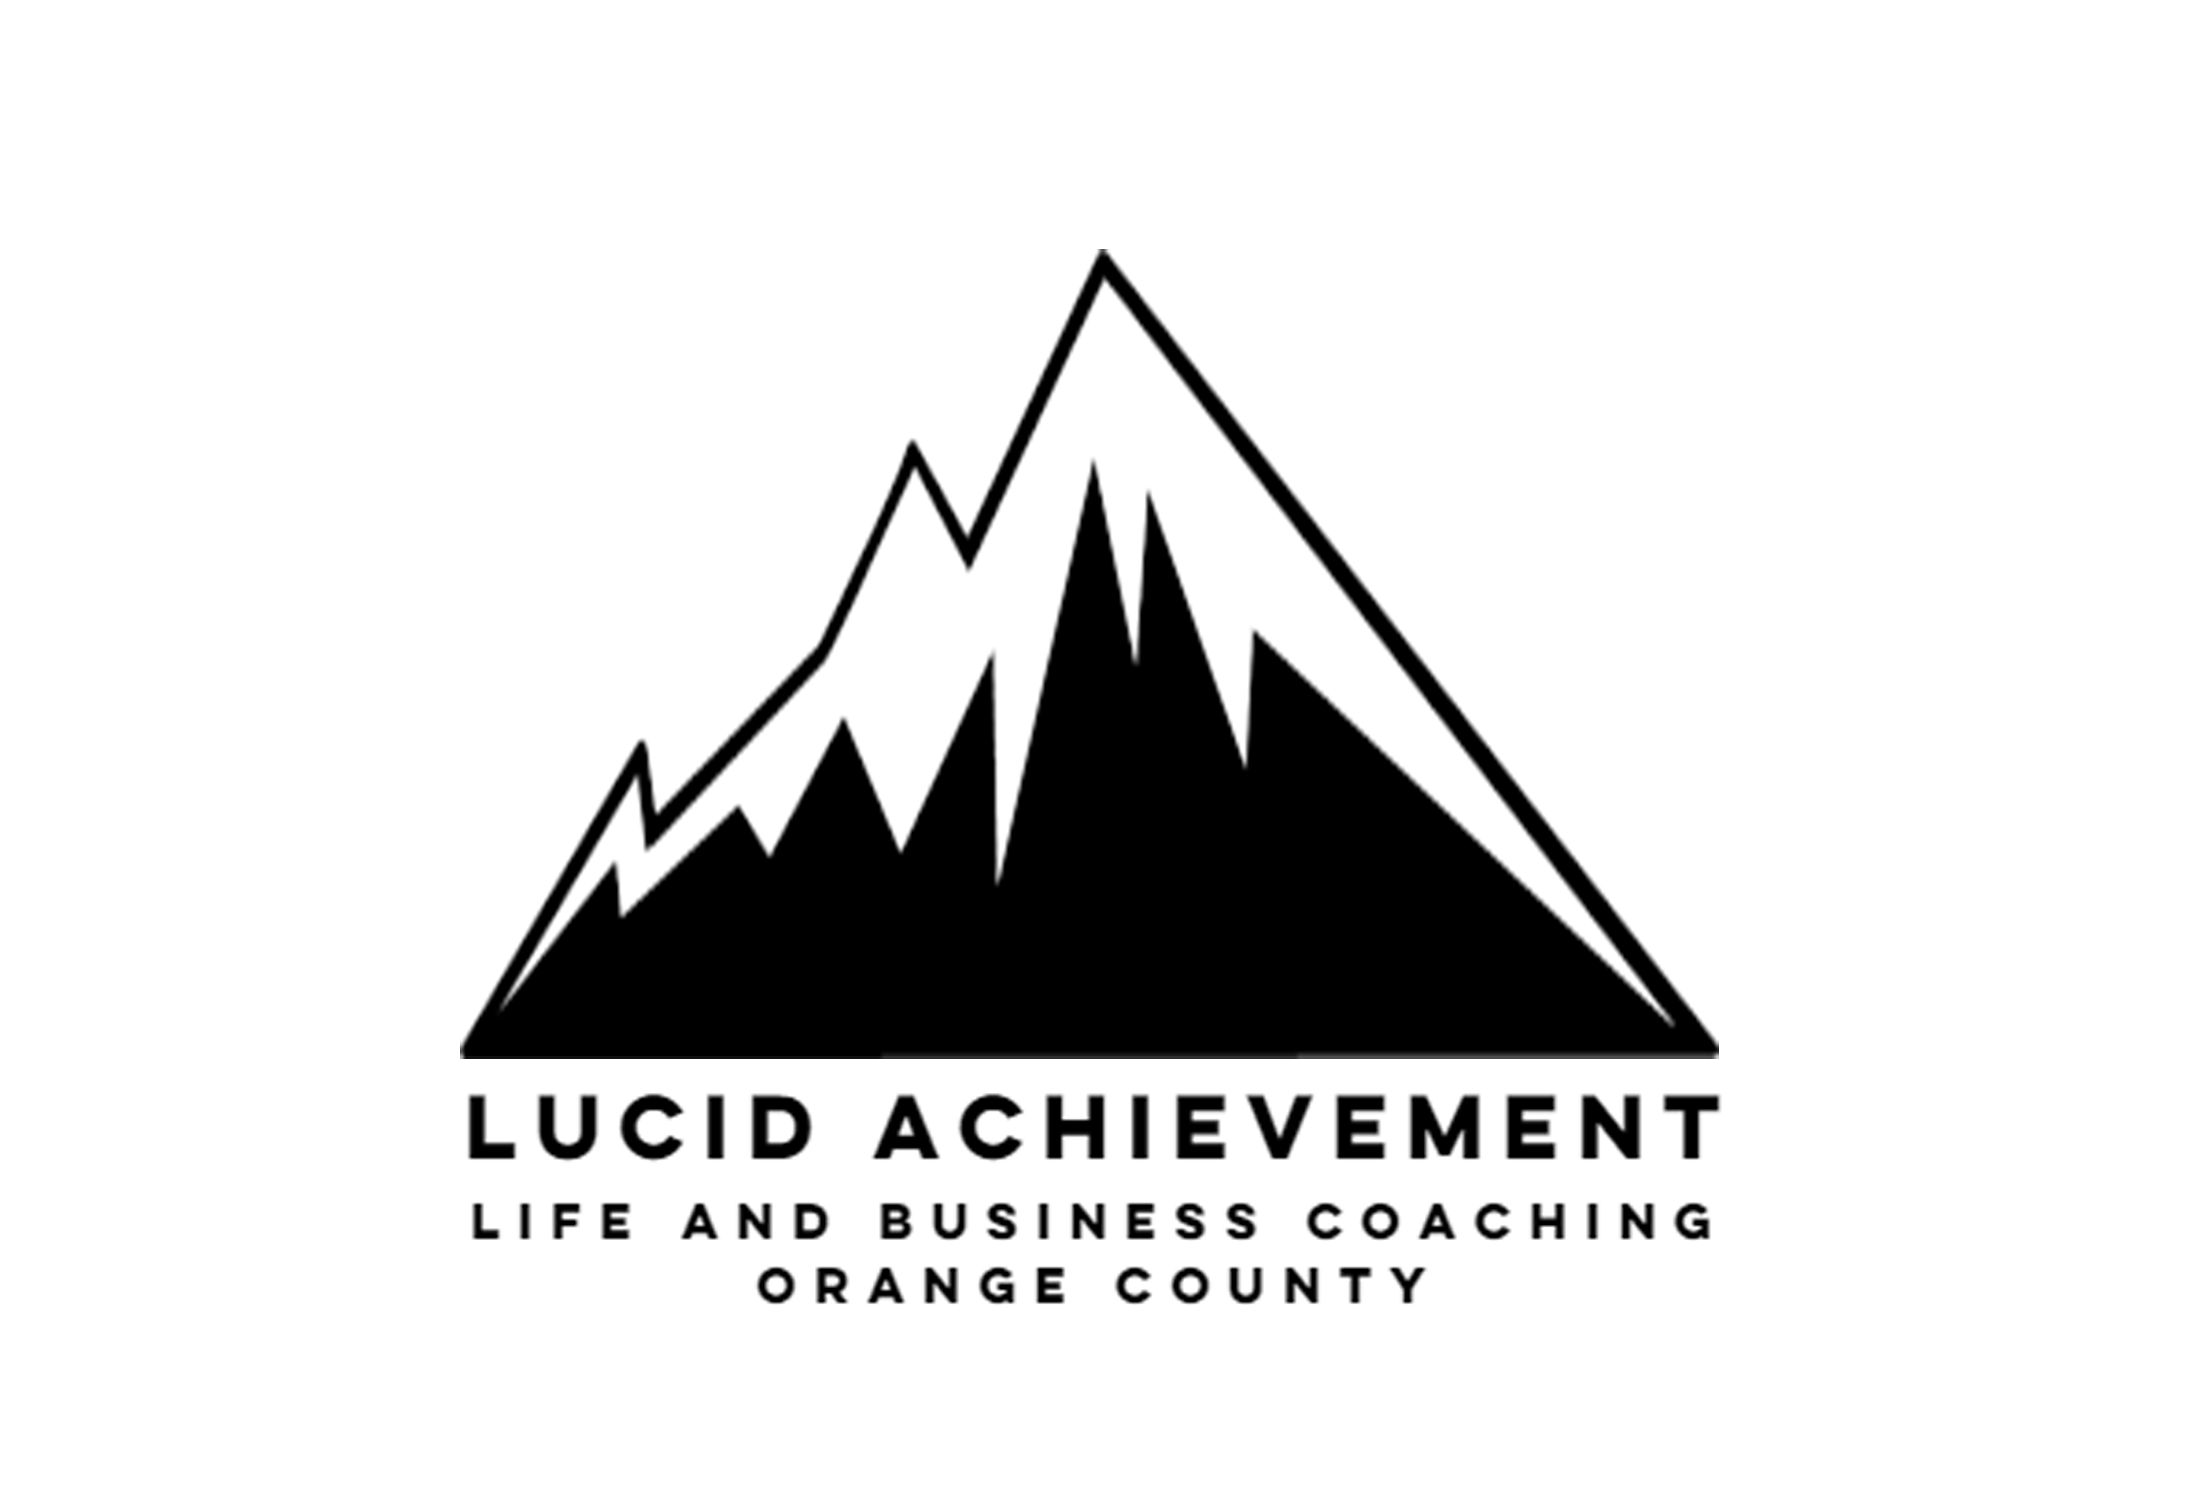 Making Your Dreams Reality - Lucid Achievement